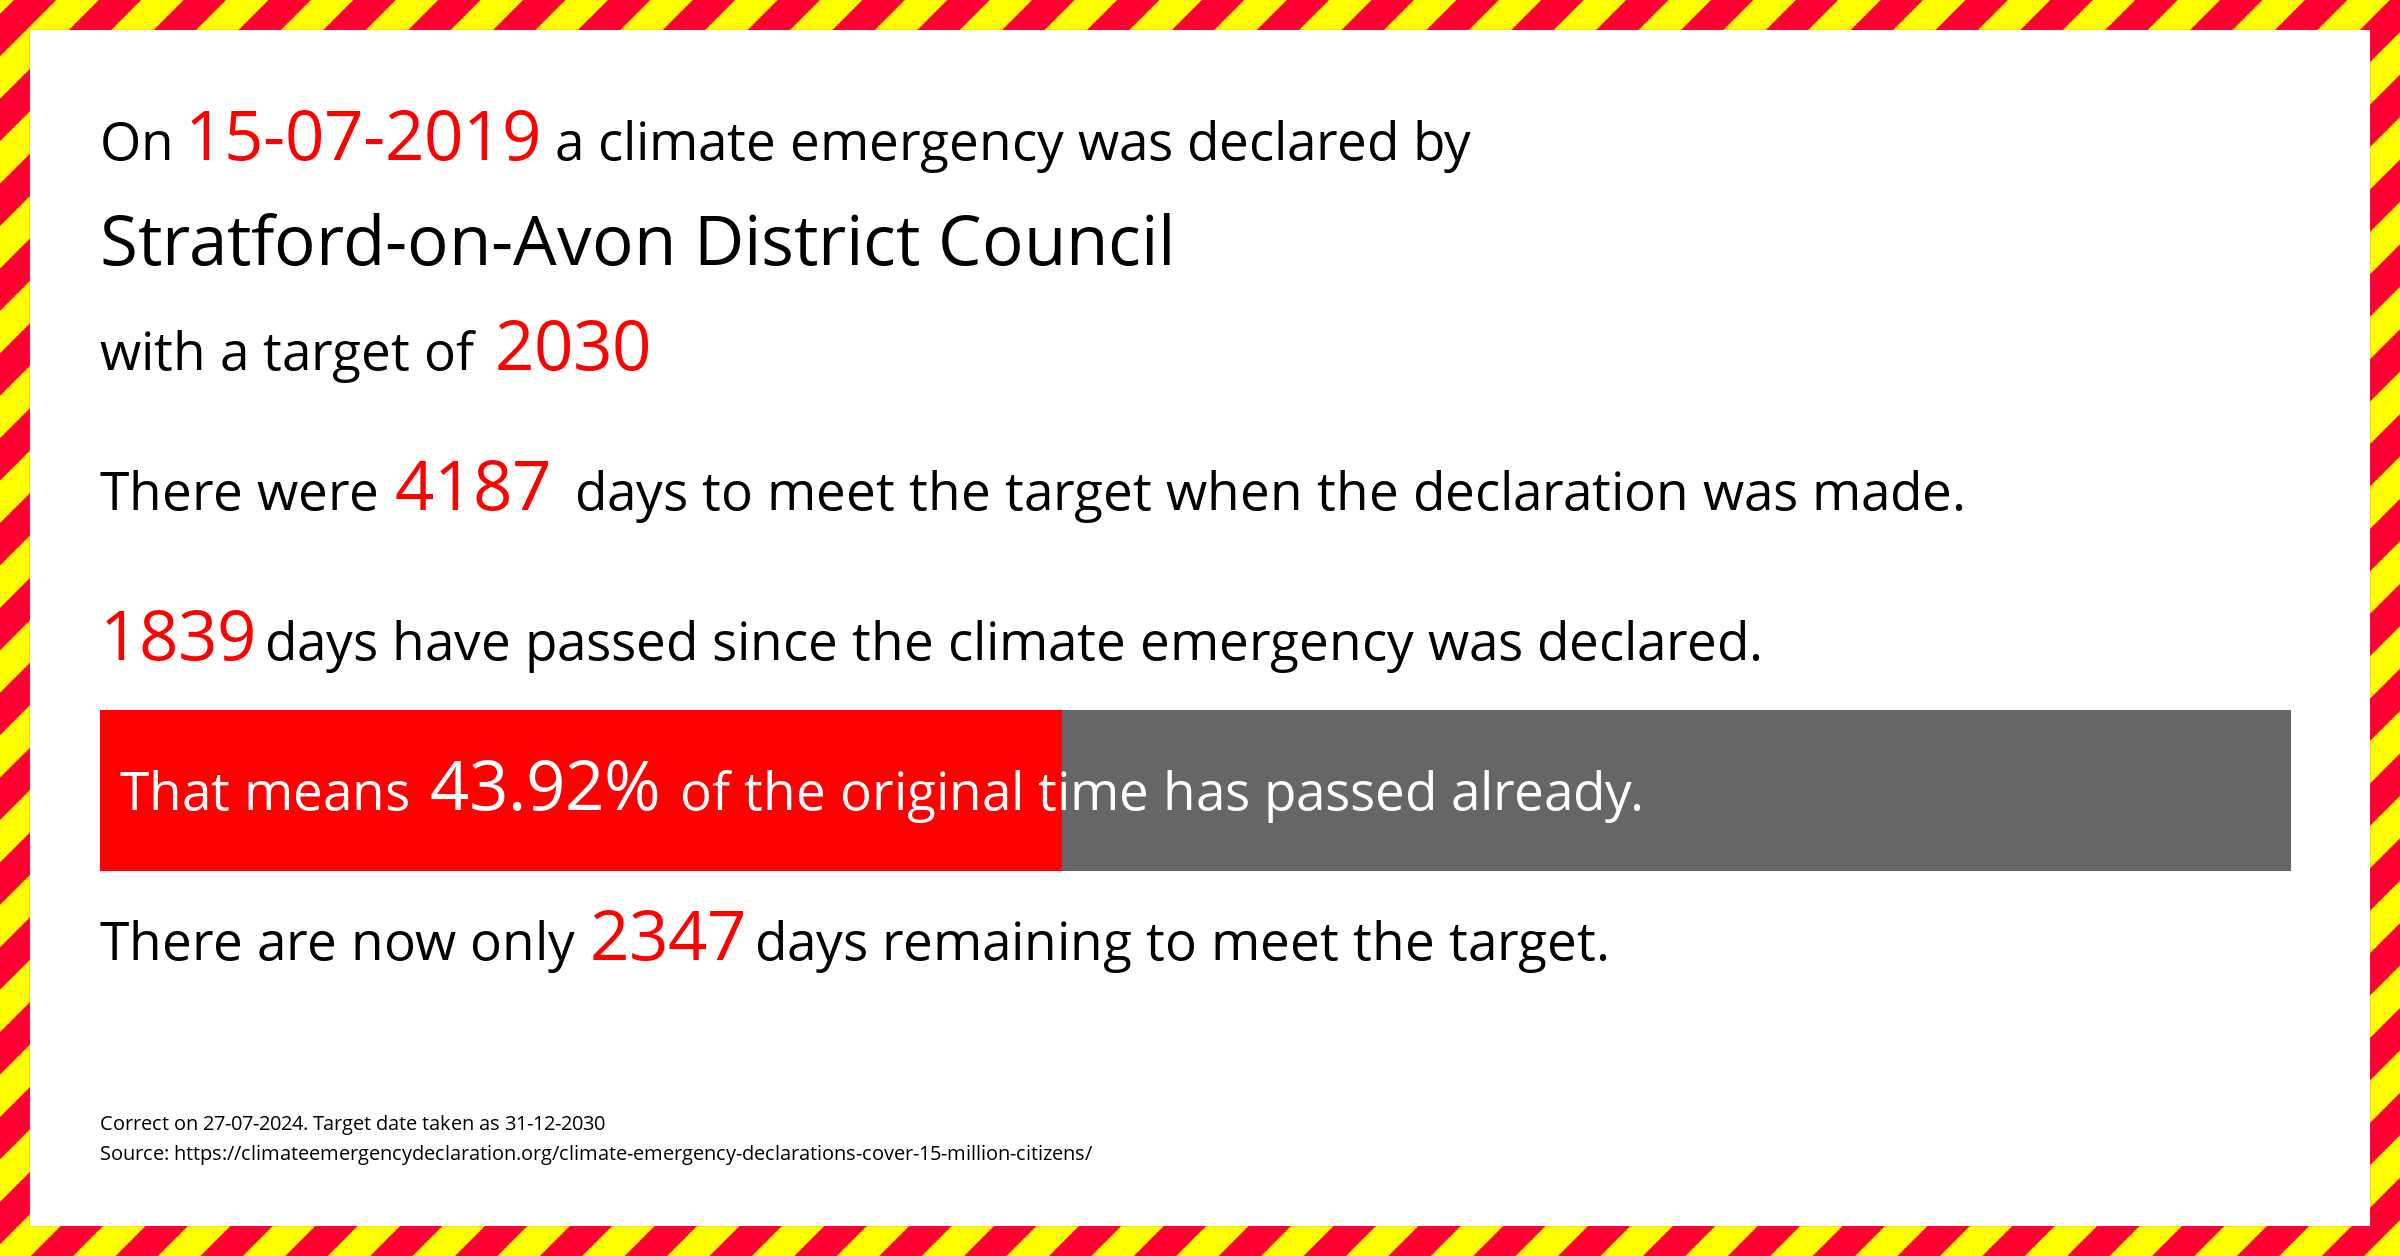 Stratford-on-Avon District Council declared a Climate emergency on Monday 15th July 2019, with a target of 2030.